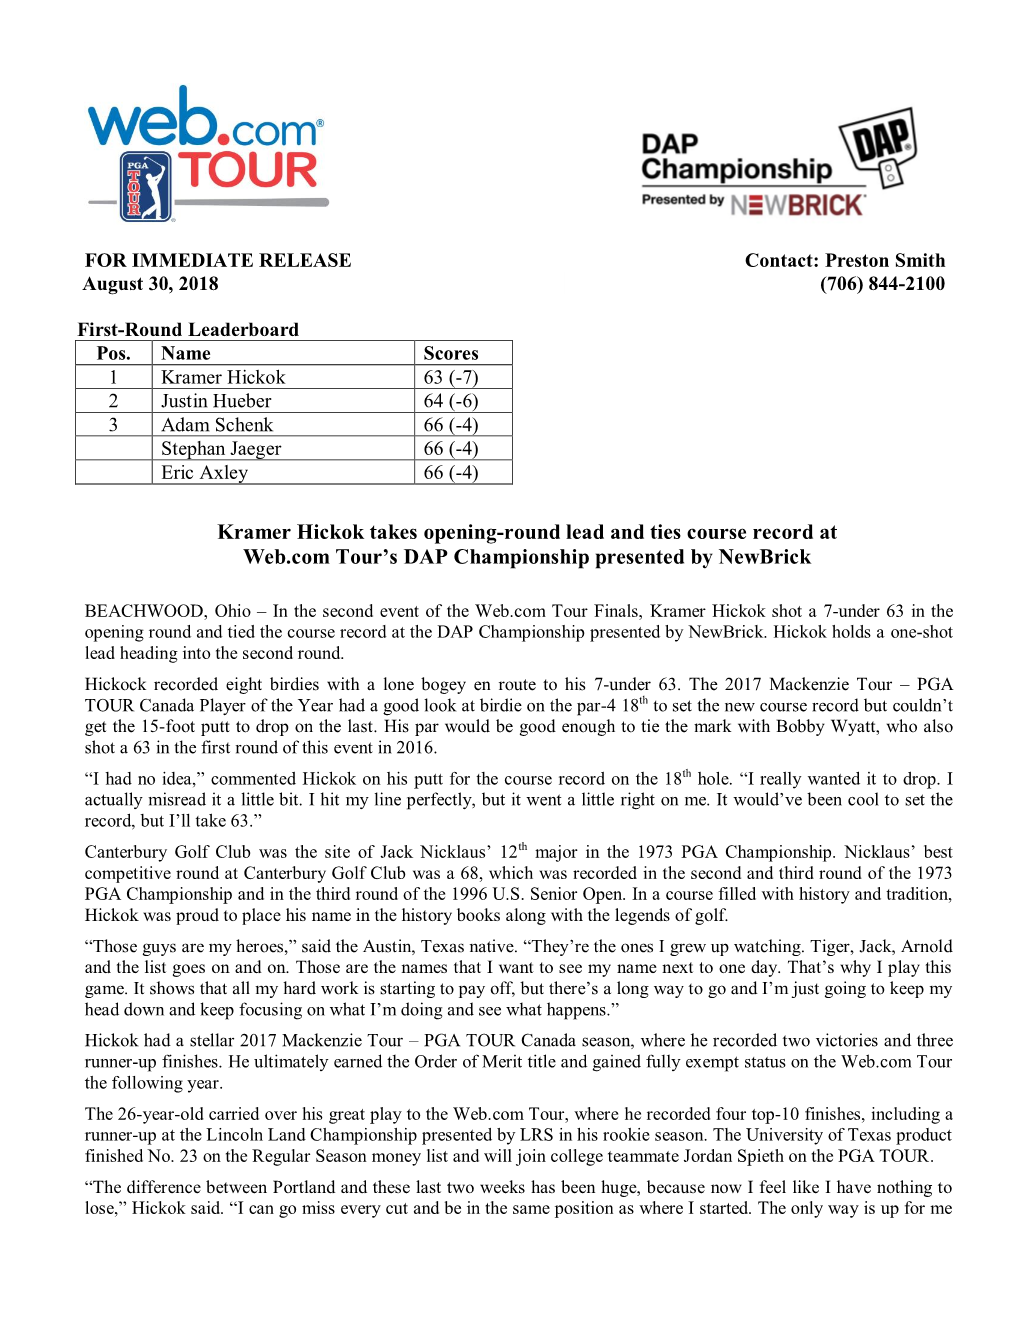 Kramer Hickok Takes Opening-Round Lead and Ties Course Record at Web.Com Tour’S DAP Championship Presented by Newbrick